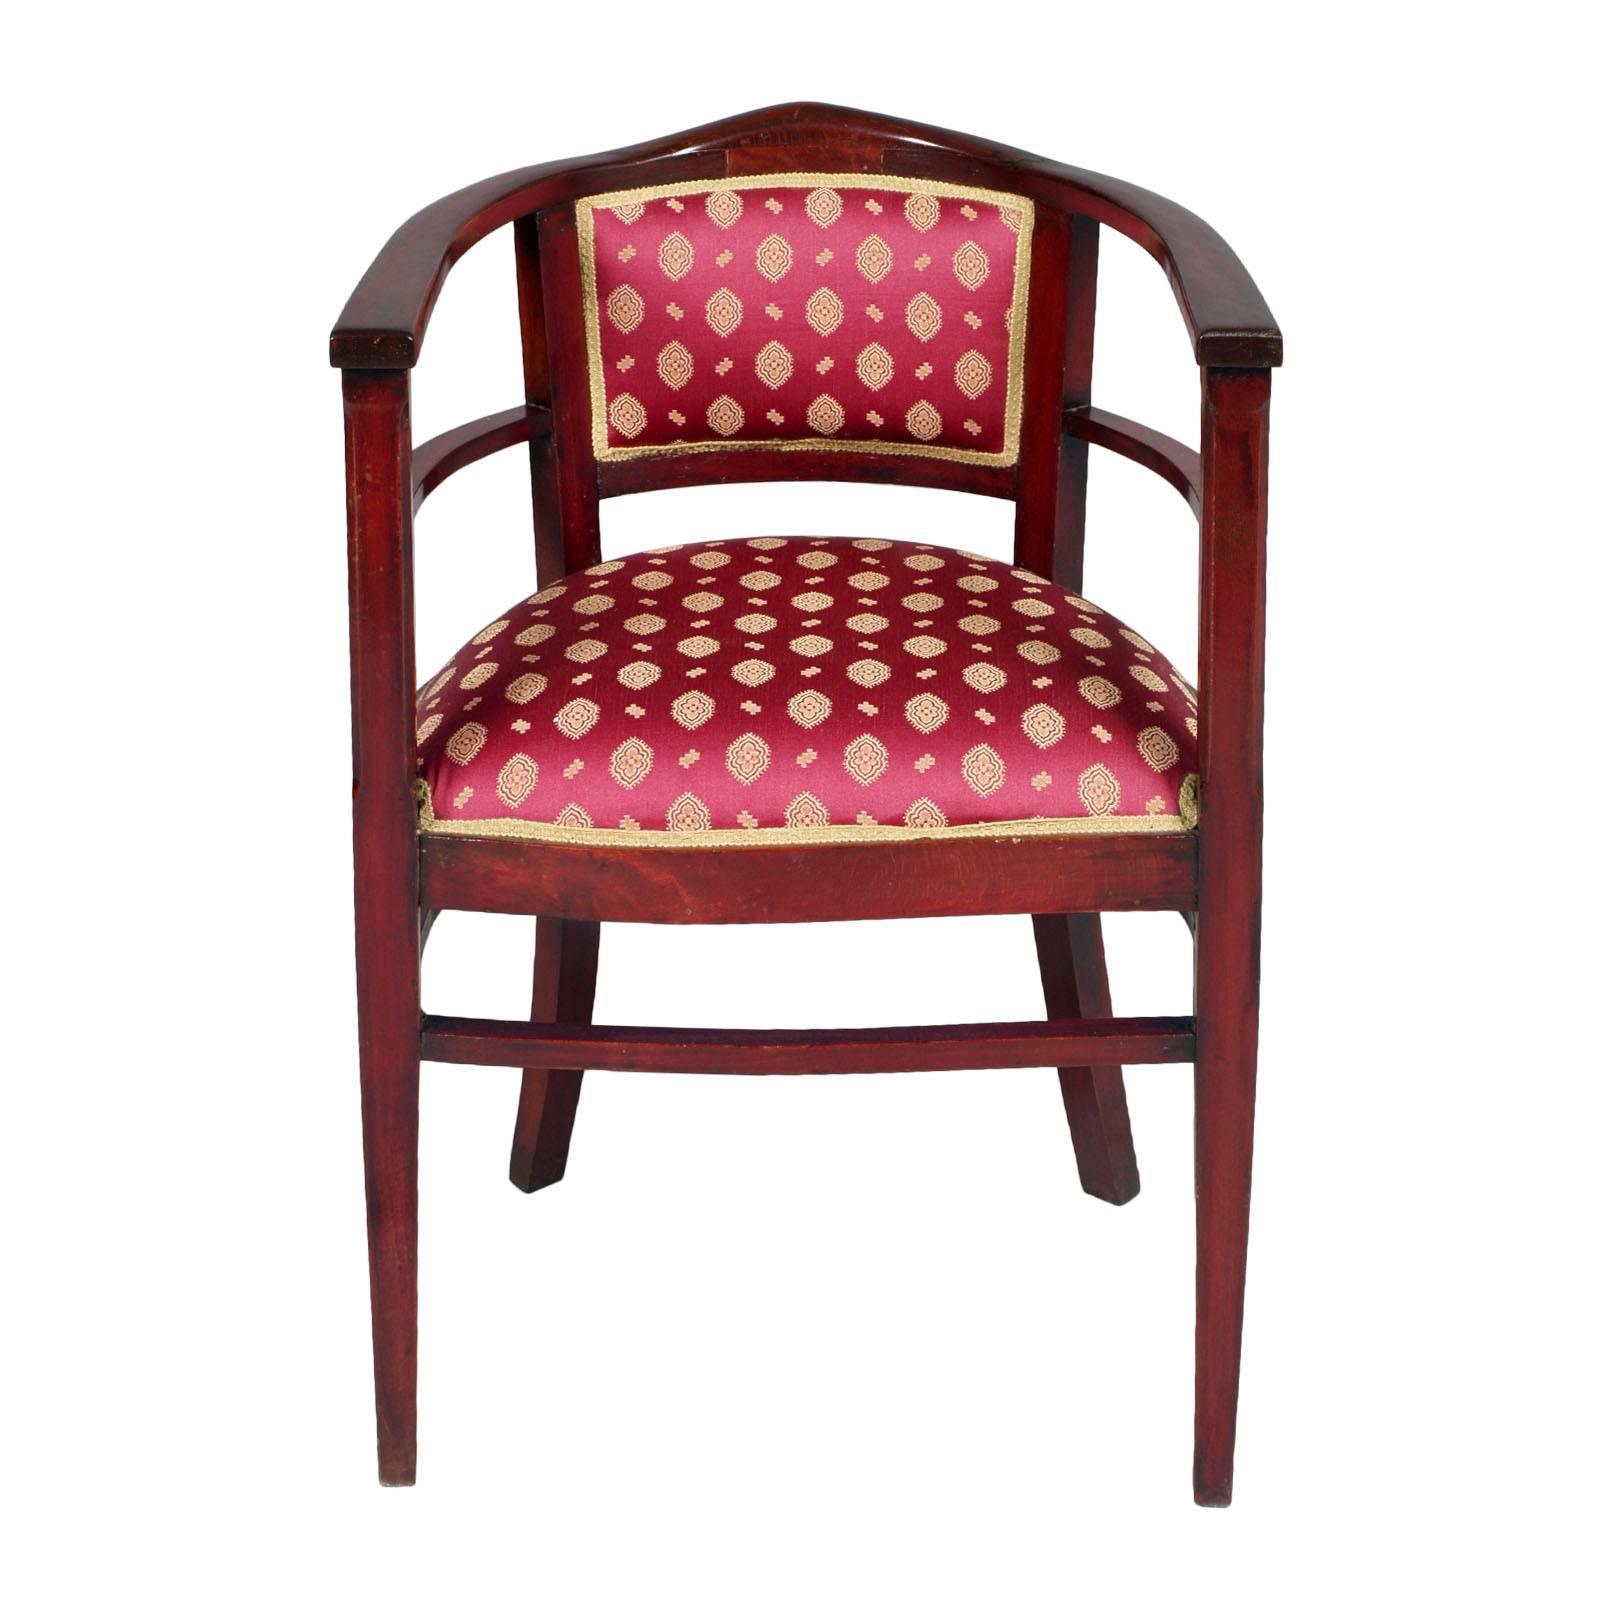 Early 20th century Austrian Art Nouveau Belle Époque chair, armchair, atributable Koloman Moser/Josef Hoffmann for Wiener Werkstätte in mahogany, restored and new upholtered.

Measure in cm: H 80/50, W 57, D 54.